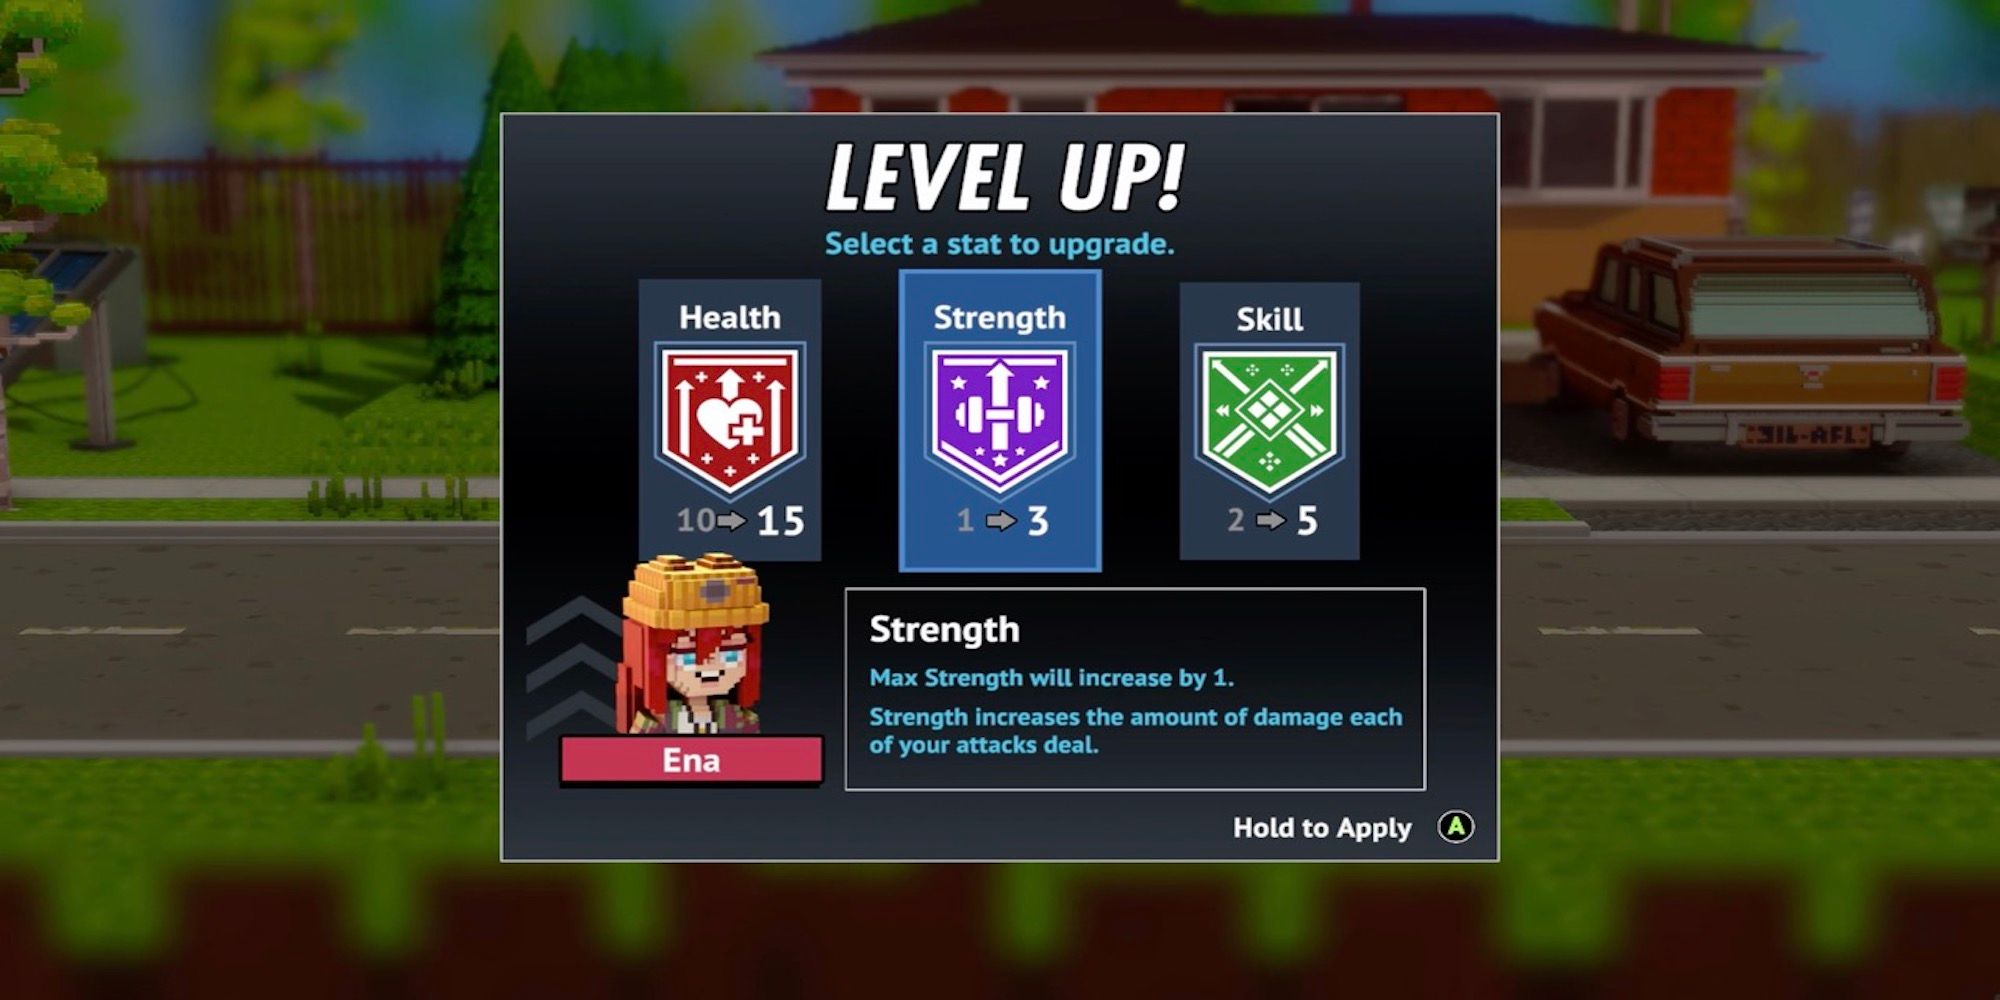 The level up screen from Echo Generation